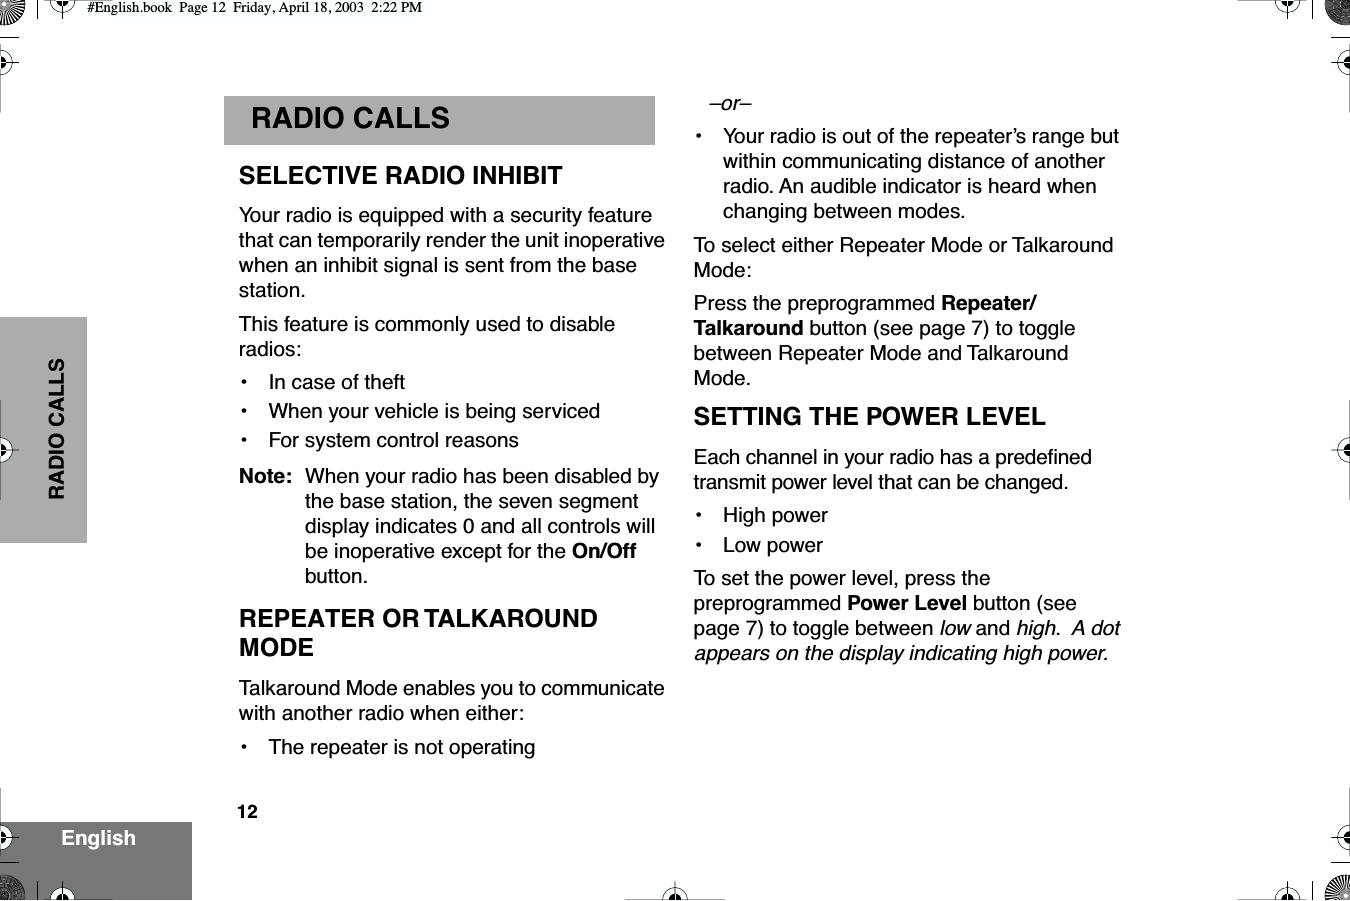  12 EnglishRADIO CALLS RADIO CALLS SELECTIVE RADIO INHIBITYour radio is equipped with a security feature that can temporarily render the unit inoperative when an inhibit signal is sent from the base station.This feature is commonly used to disable radios:• In case of theft•When your vehicle is being serviced•For system control reasonsNote: When your radio has been disabled by the base station, the seven segment display indicates 0 and all controls will be inoperative except for the On/Off button.REPEATER OR TALKAROUND MODETalkaround Mode enables you to communicate with another radio when either:• The repeater is not operating–or–•Your radio is out of the repeater’s range but within communicating distance of another radio. An audible indicator is heard when changing between modes.To  select either Repeater Mode or Talkaround Mode:Press the preprogrammed Repeater/Talkaround button (see page 7) to toggle between Repeater Mode and Talkaround Mode.SETTING THE POWER LEVELEach channel in your radio has a predeﬁned transmit power level that can be changed.• High power•Low powerTo  set the power level, press the preprogrammed Power Level button (see page 7) to toggle between low and high.  A dot appears on the display indicating high power.#English.book  Page 12  Friday, April 18, 2003  2:22 PM